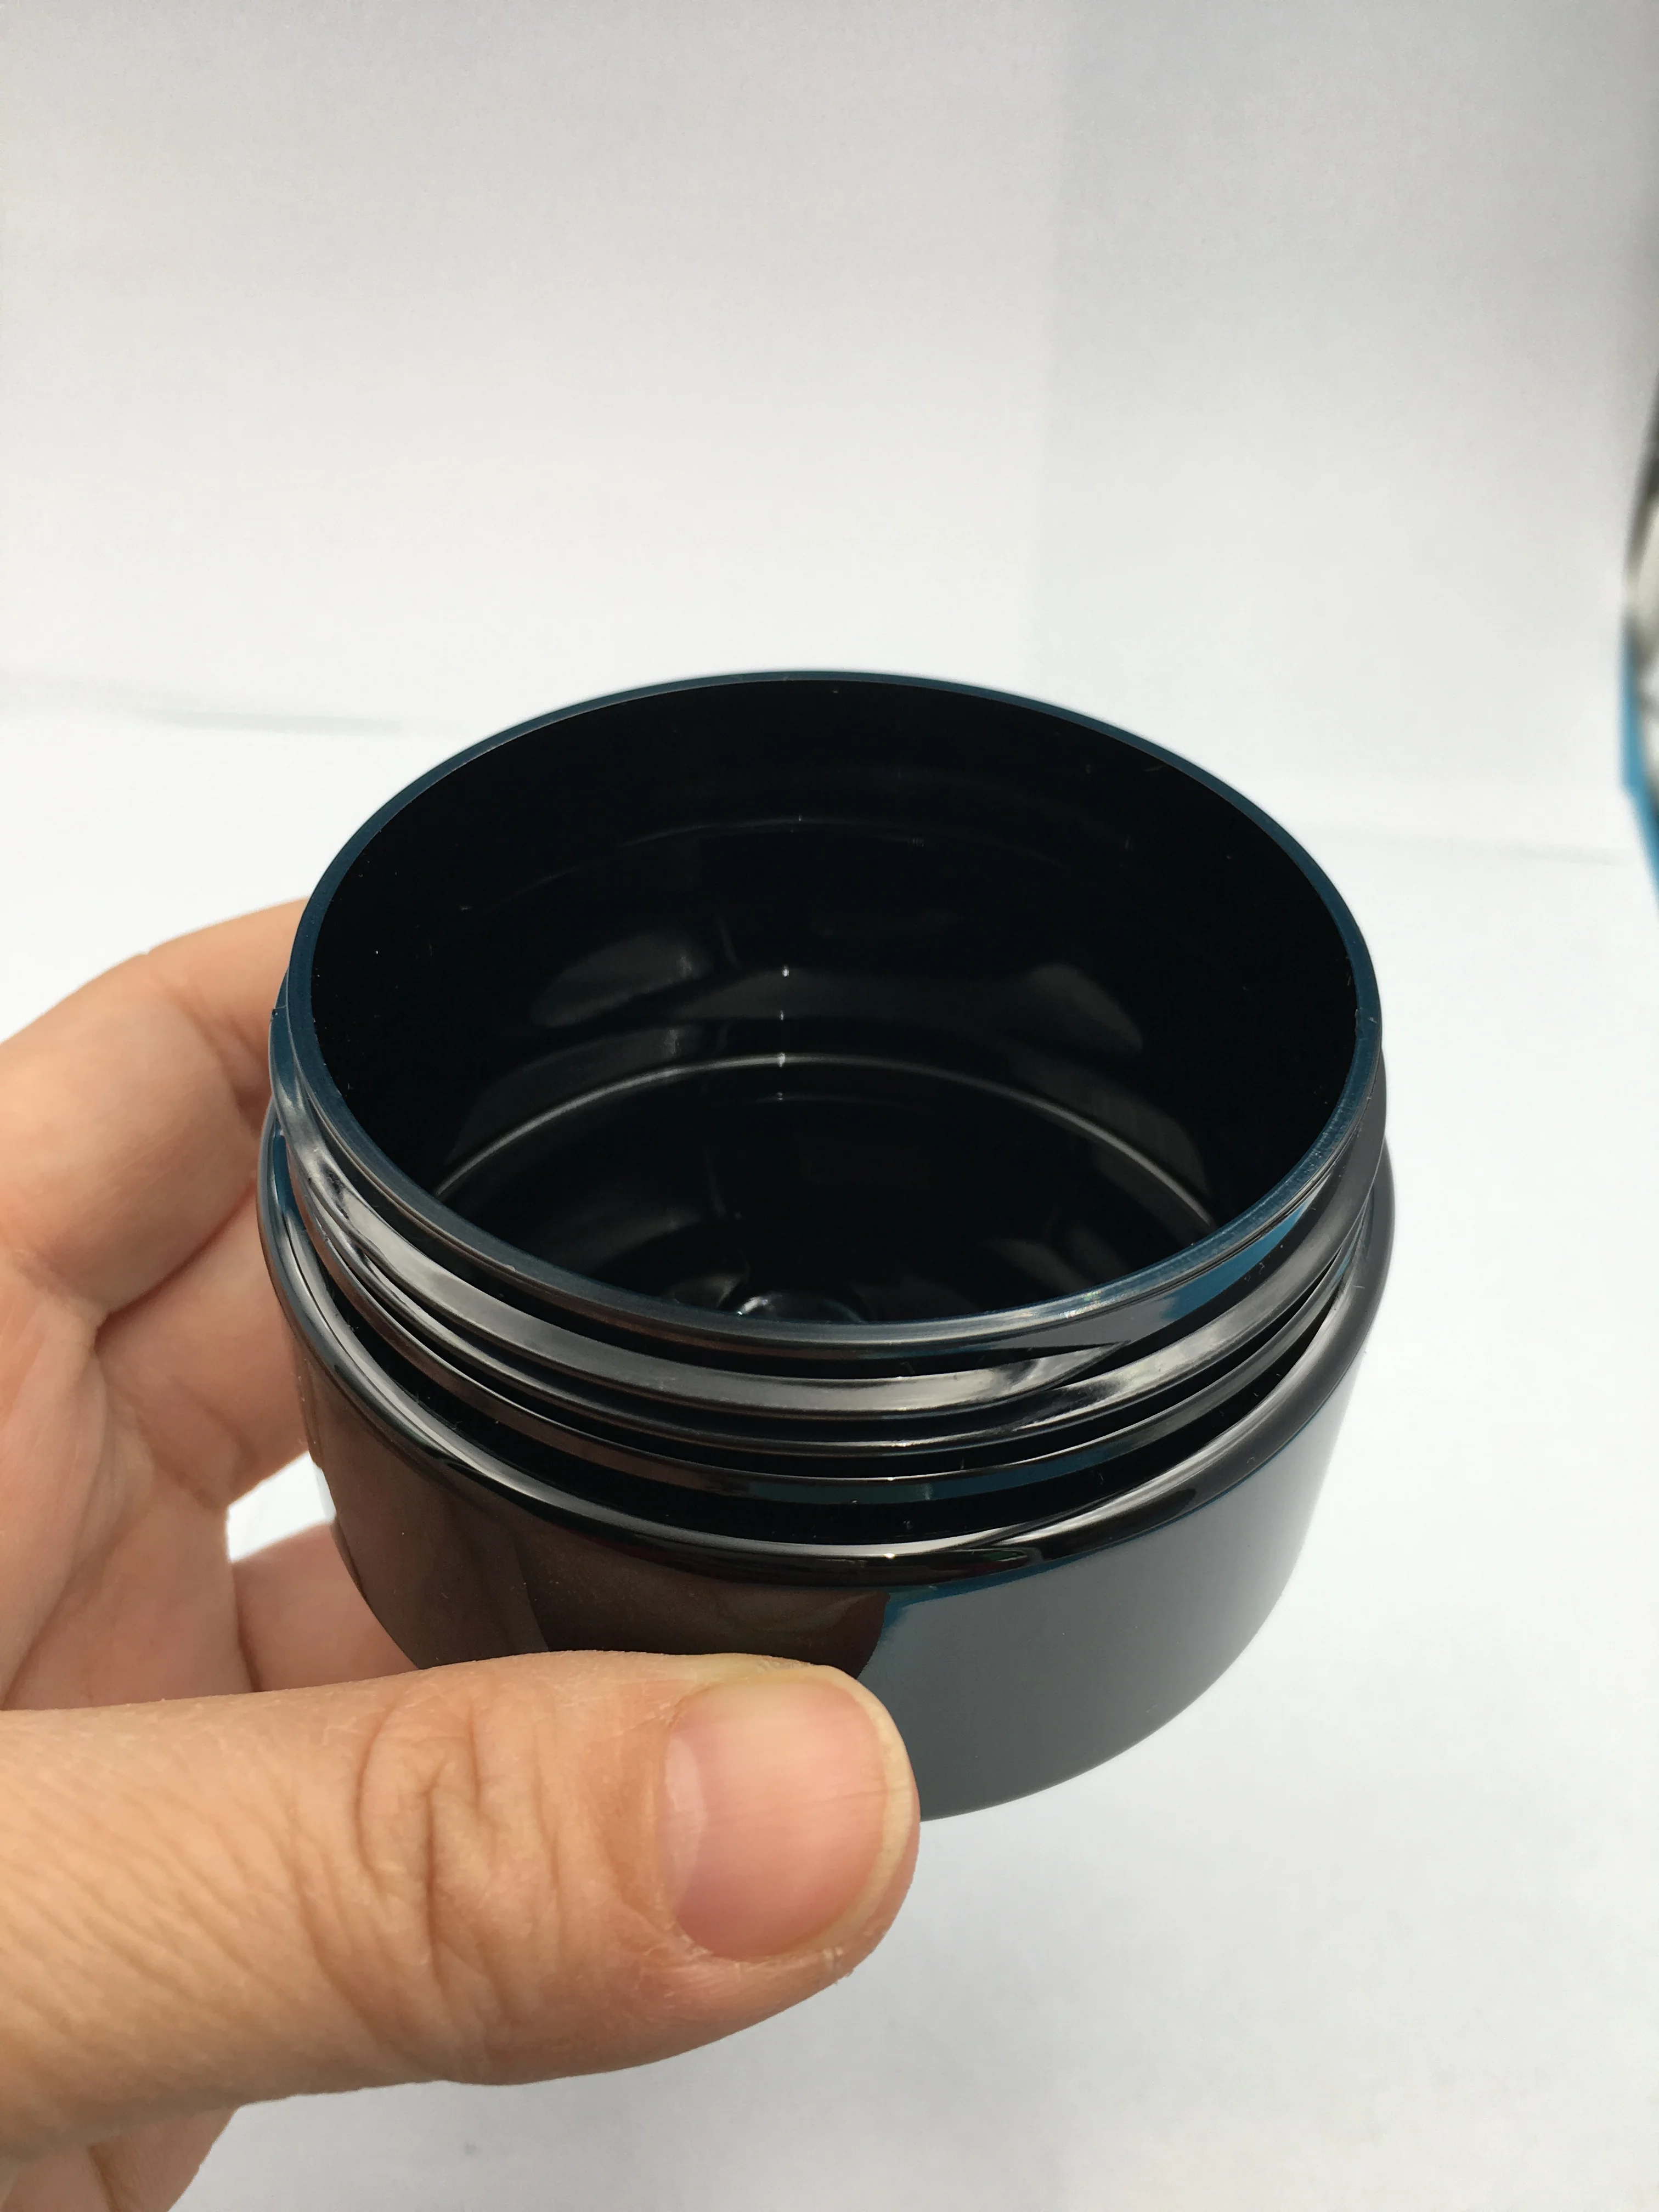 100ml 250g black cream bottle light-proof candy container biscuit jar male bottle PET bank 30 free shipping images - 6